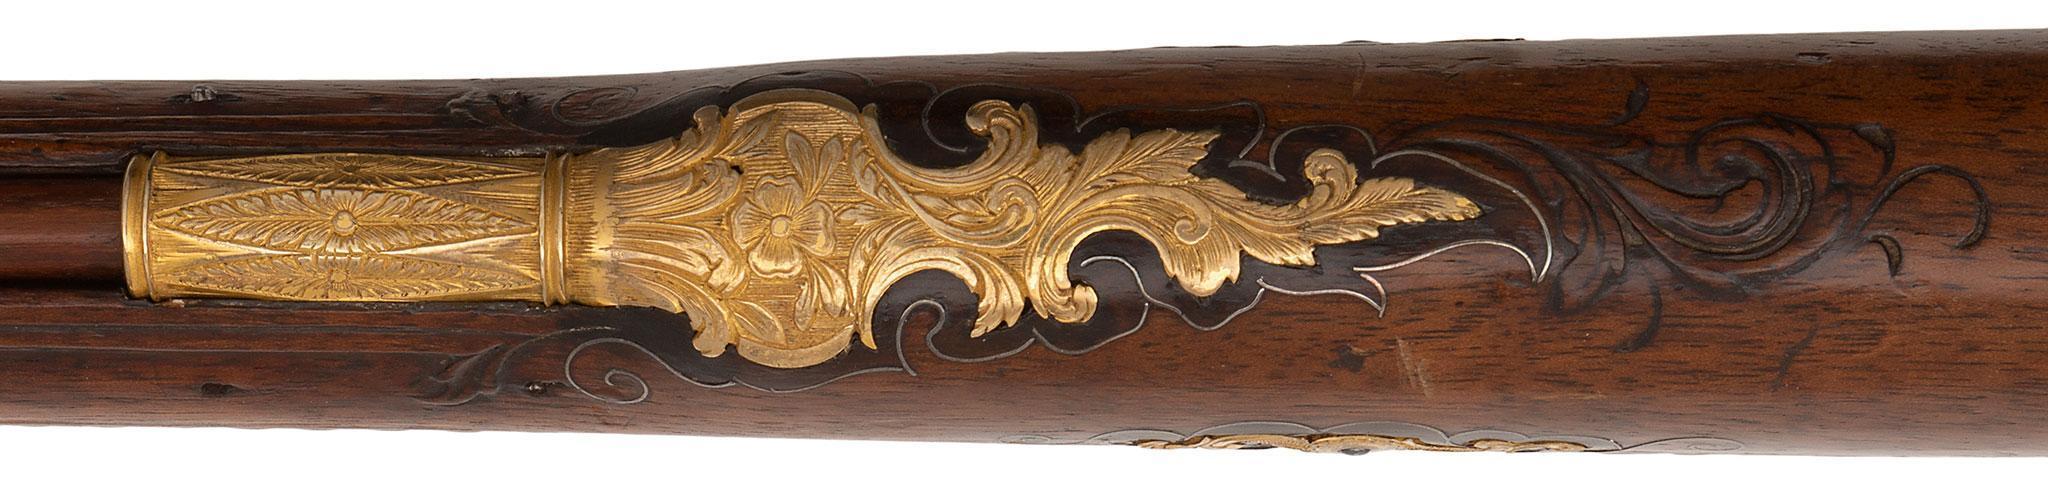 A Very Fine Quality Gilt Bronze Mounted, Silver And Gold Inlaid Austrian Wheel-lock Sporting Rifle